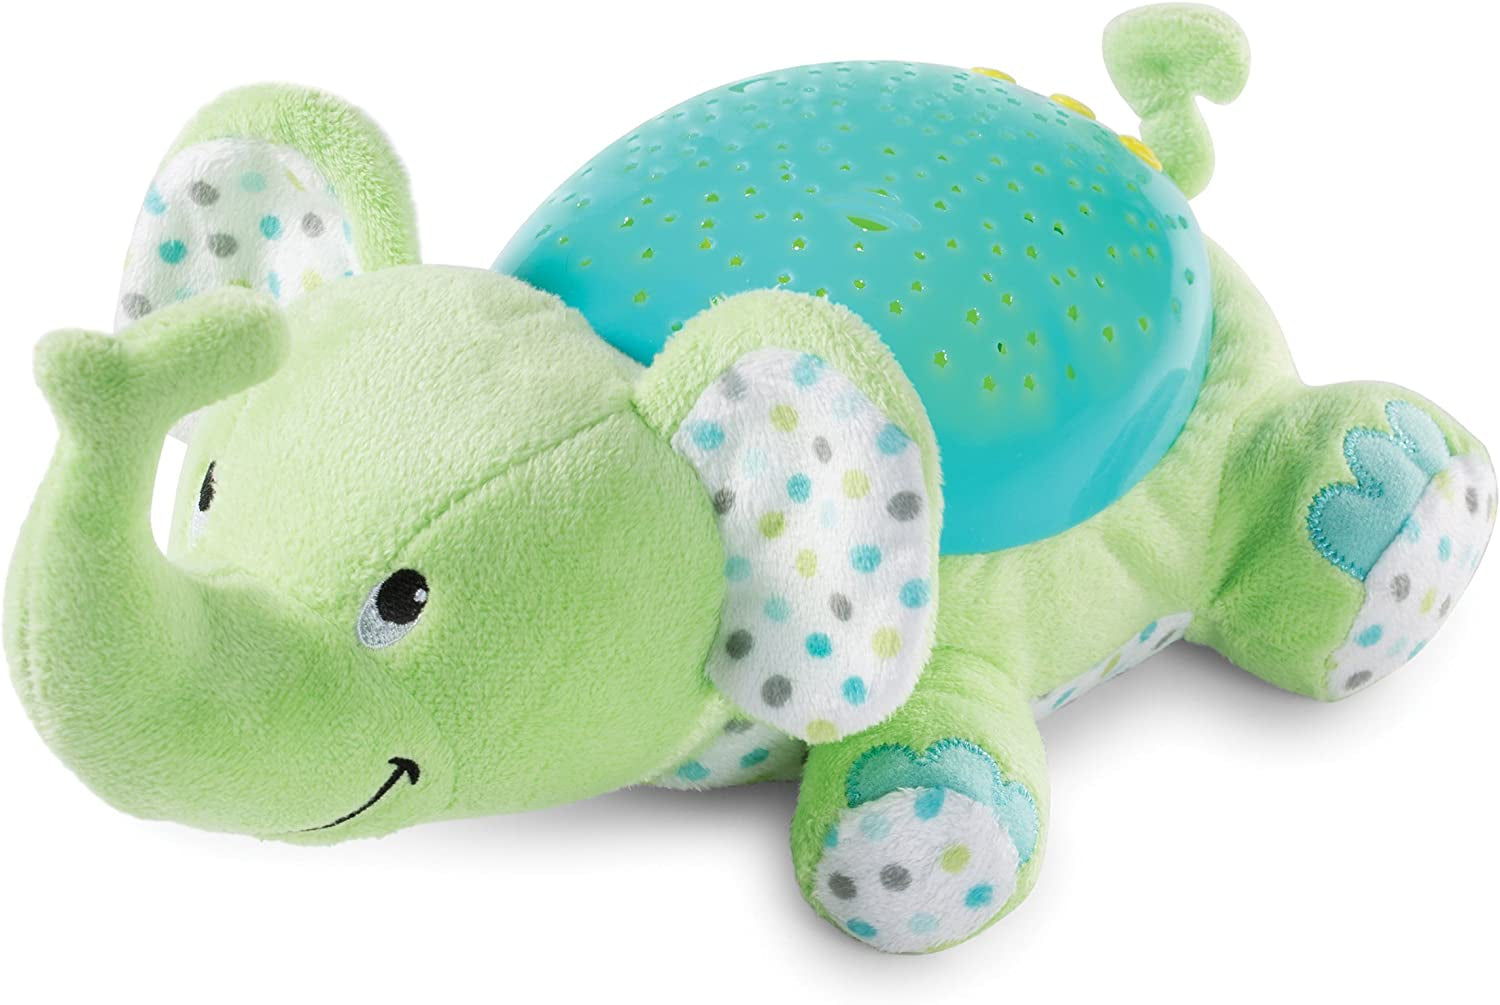 Summer Infant Slumber Buddies | Soft Plush Toy with 5 Songs & Nature Sounds, Starry Sky Display, Rhythmic Light Show | Timer with Auto Shut-Off, 3 Volume Control | Eddie the Elephant